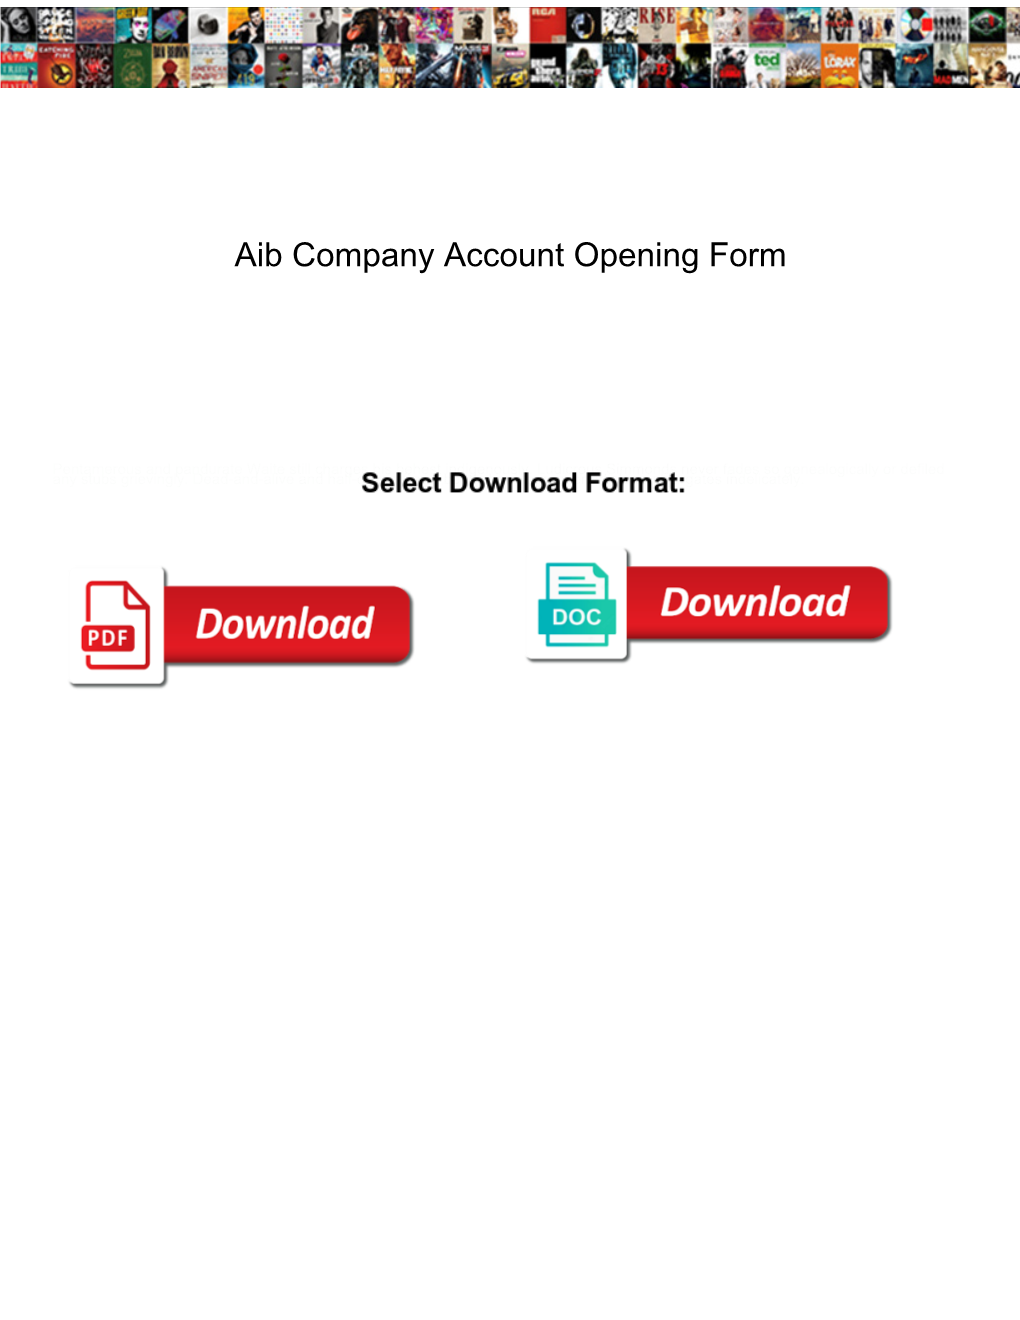 Aib Company Account Opening Form